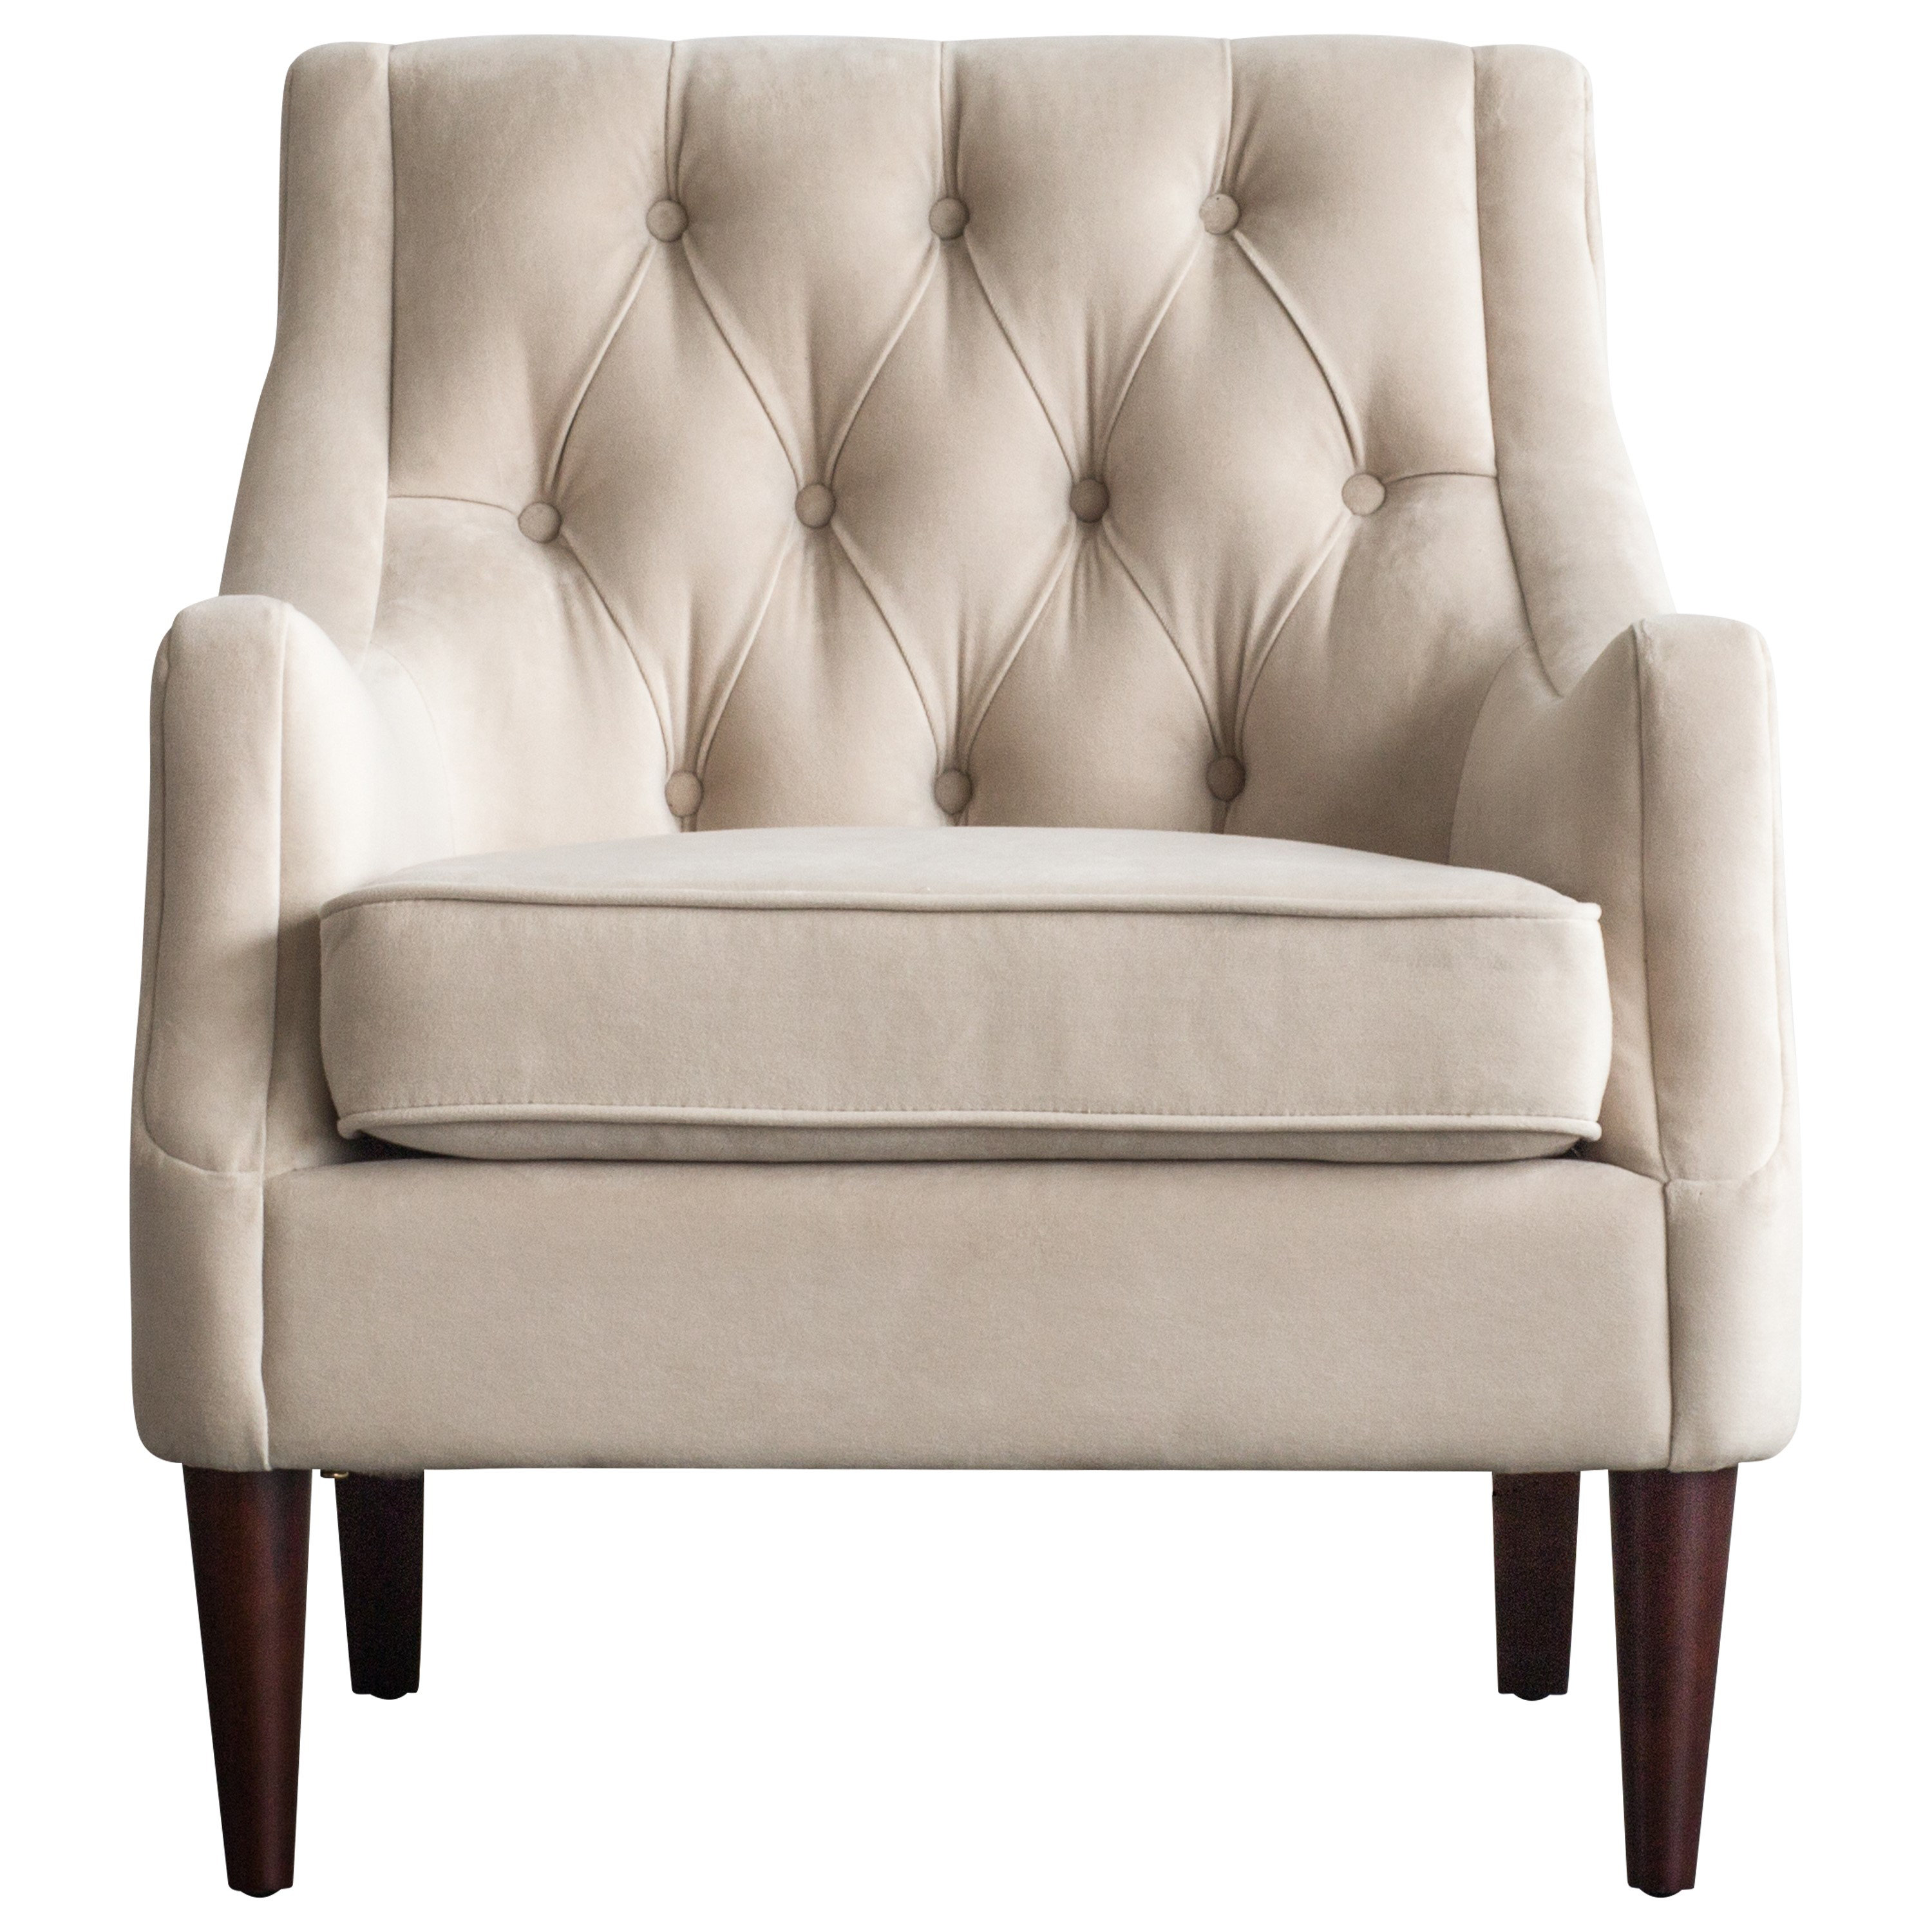 small tufted chair